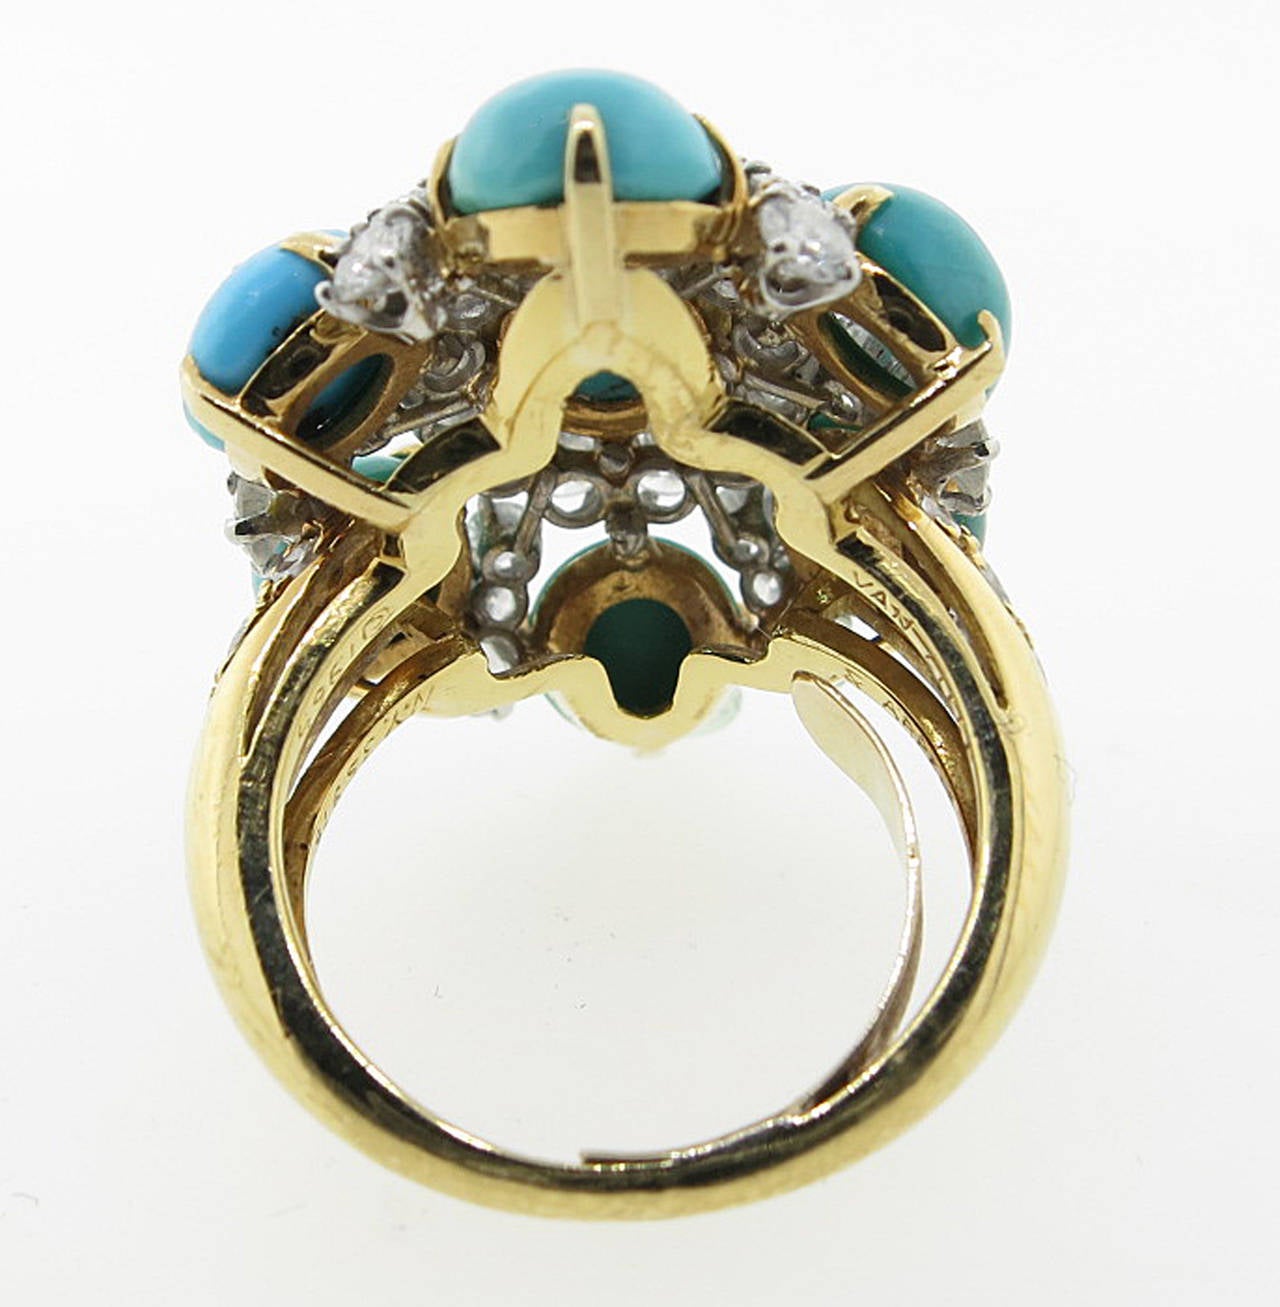 High Style 18kt. yellow gold turquoise and diamond ring by VAN CLEEF & ARPELS. The center is prong set with an oval natural turquoise measuring 9.8mm. x 8.7mm. surrounded by 6 round cabachon turquoise each measuring approx 7.mm. The exquisitely made